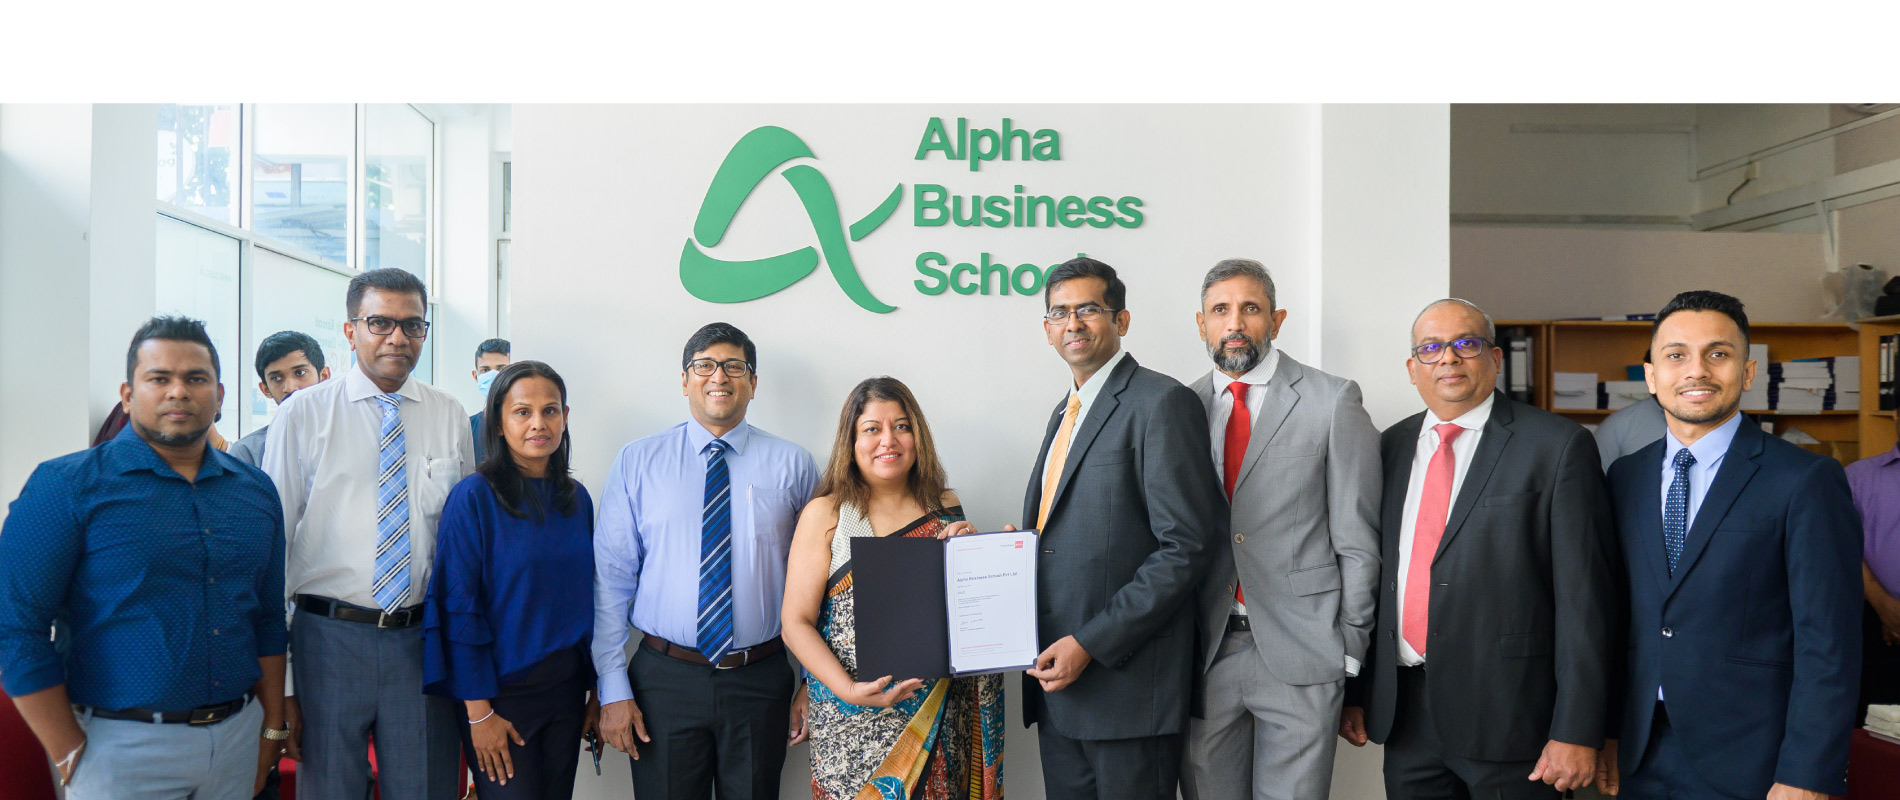 Alpha Business School is an ACCA Gold Accredited Tuition provider